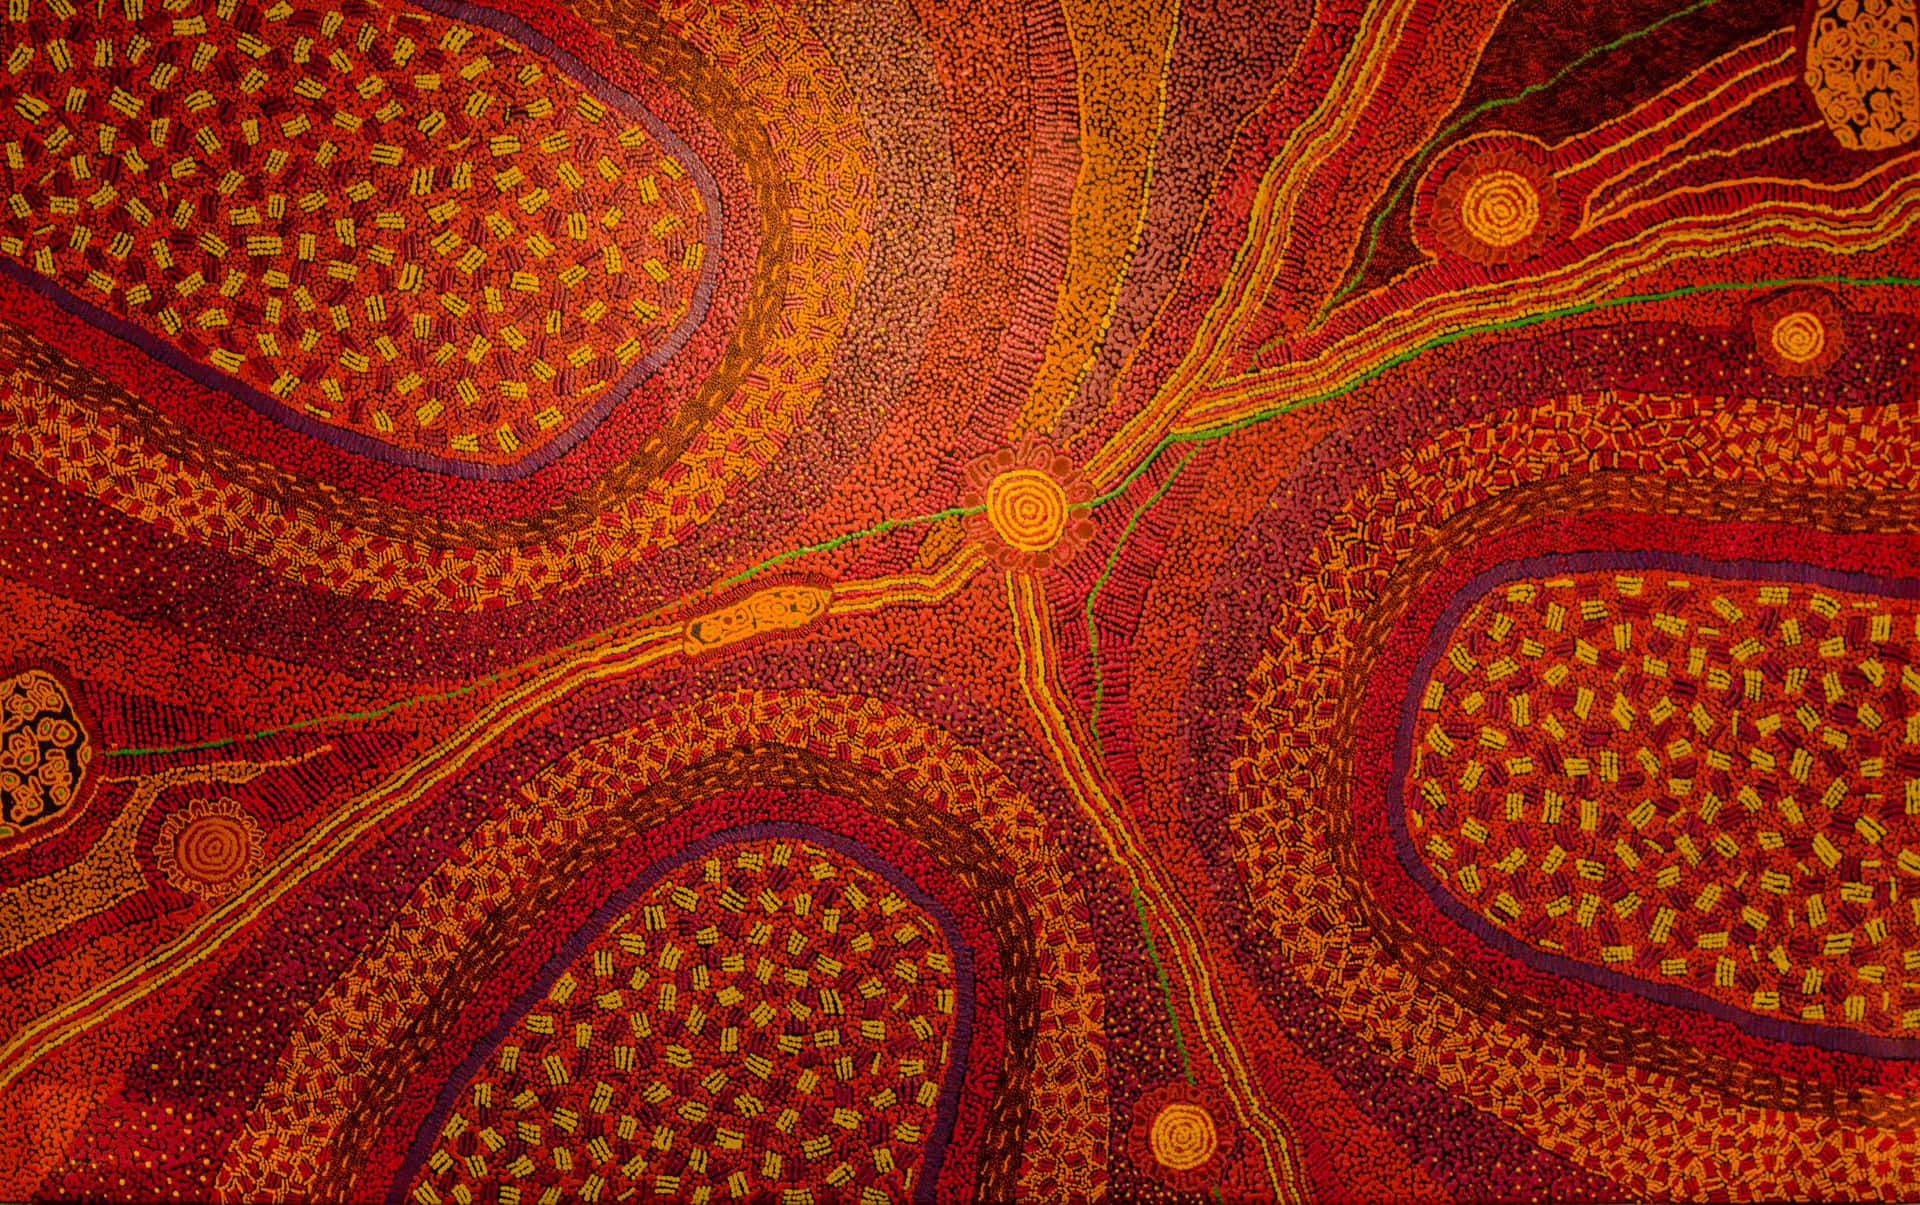 An Aboriginal Painting With Red And Orange Colors